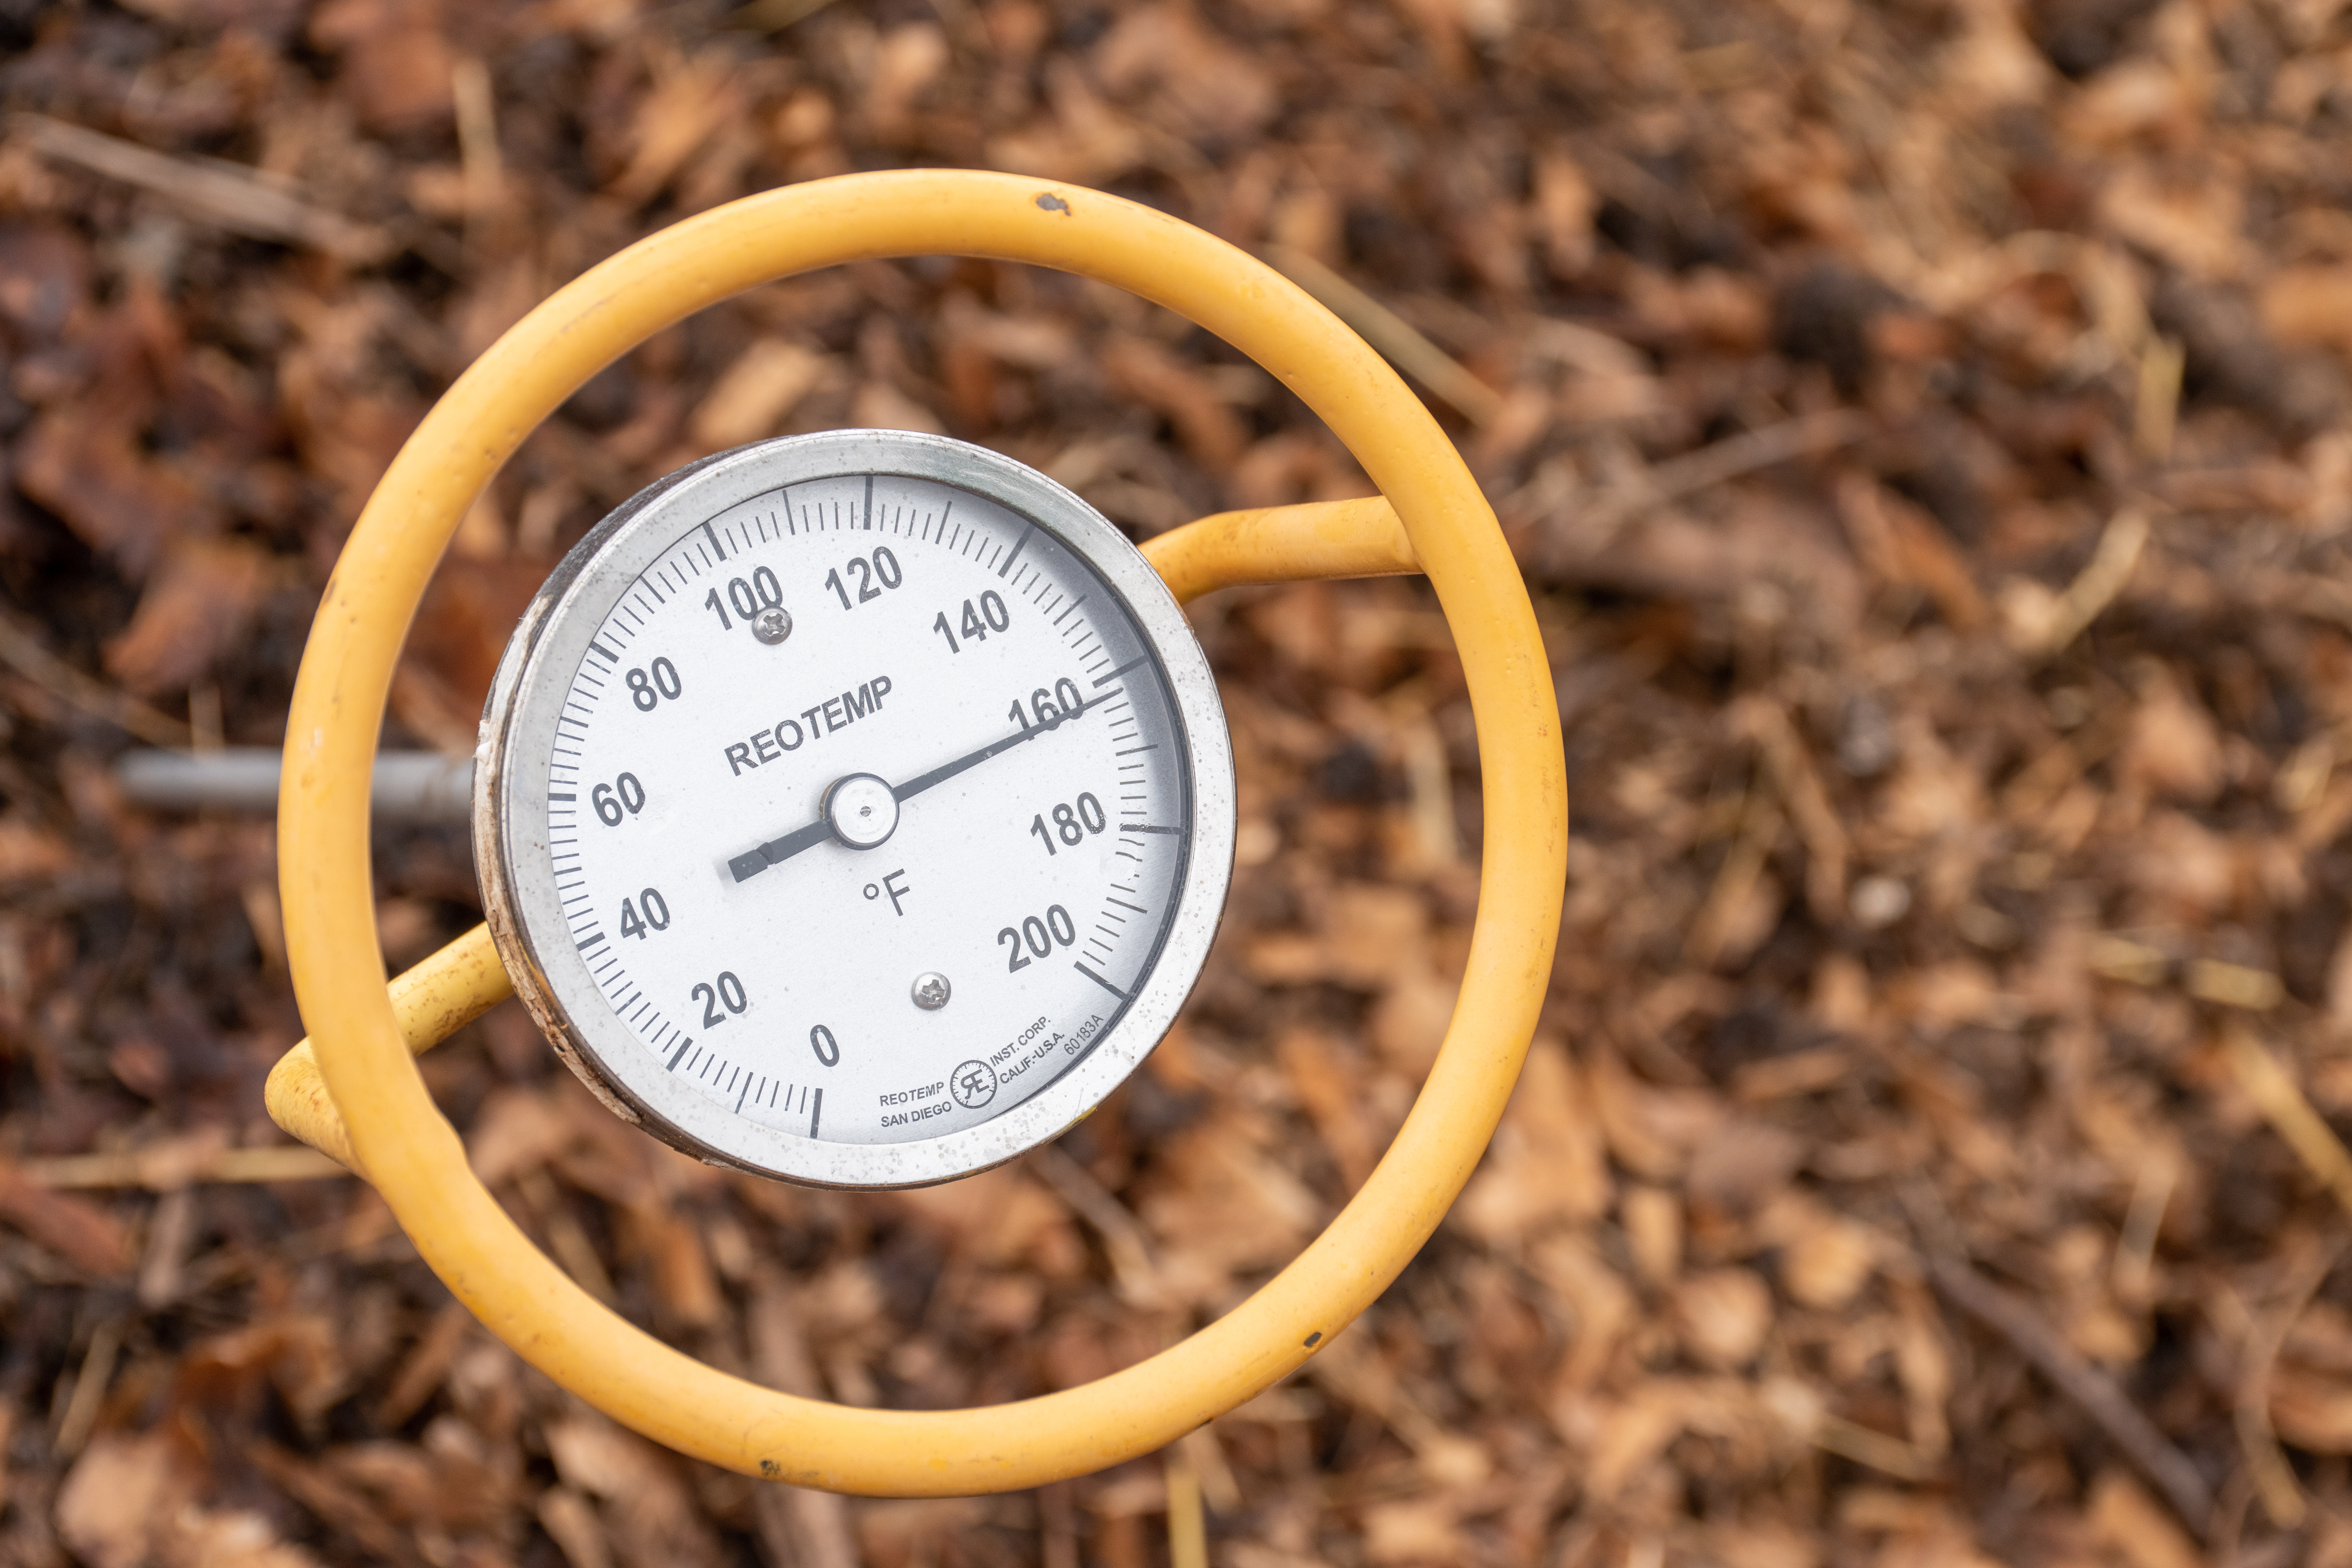 A yellow-framed thermometer monitors compost piles of brown-bark like piles.